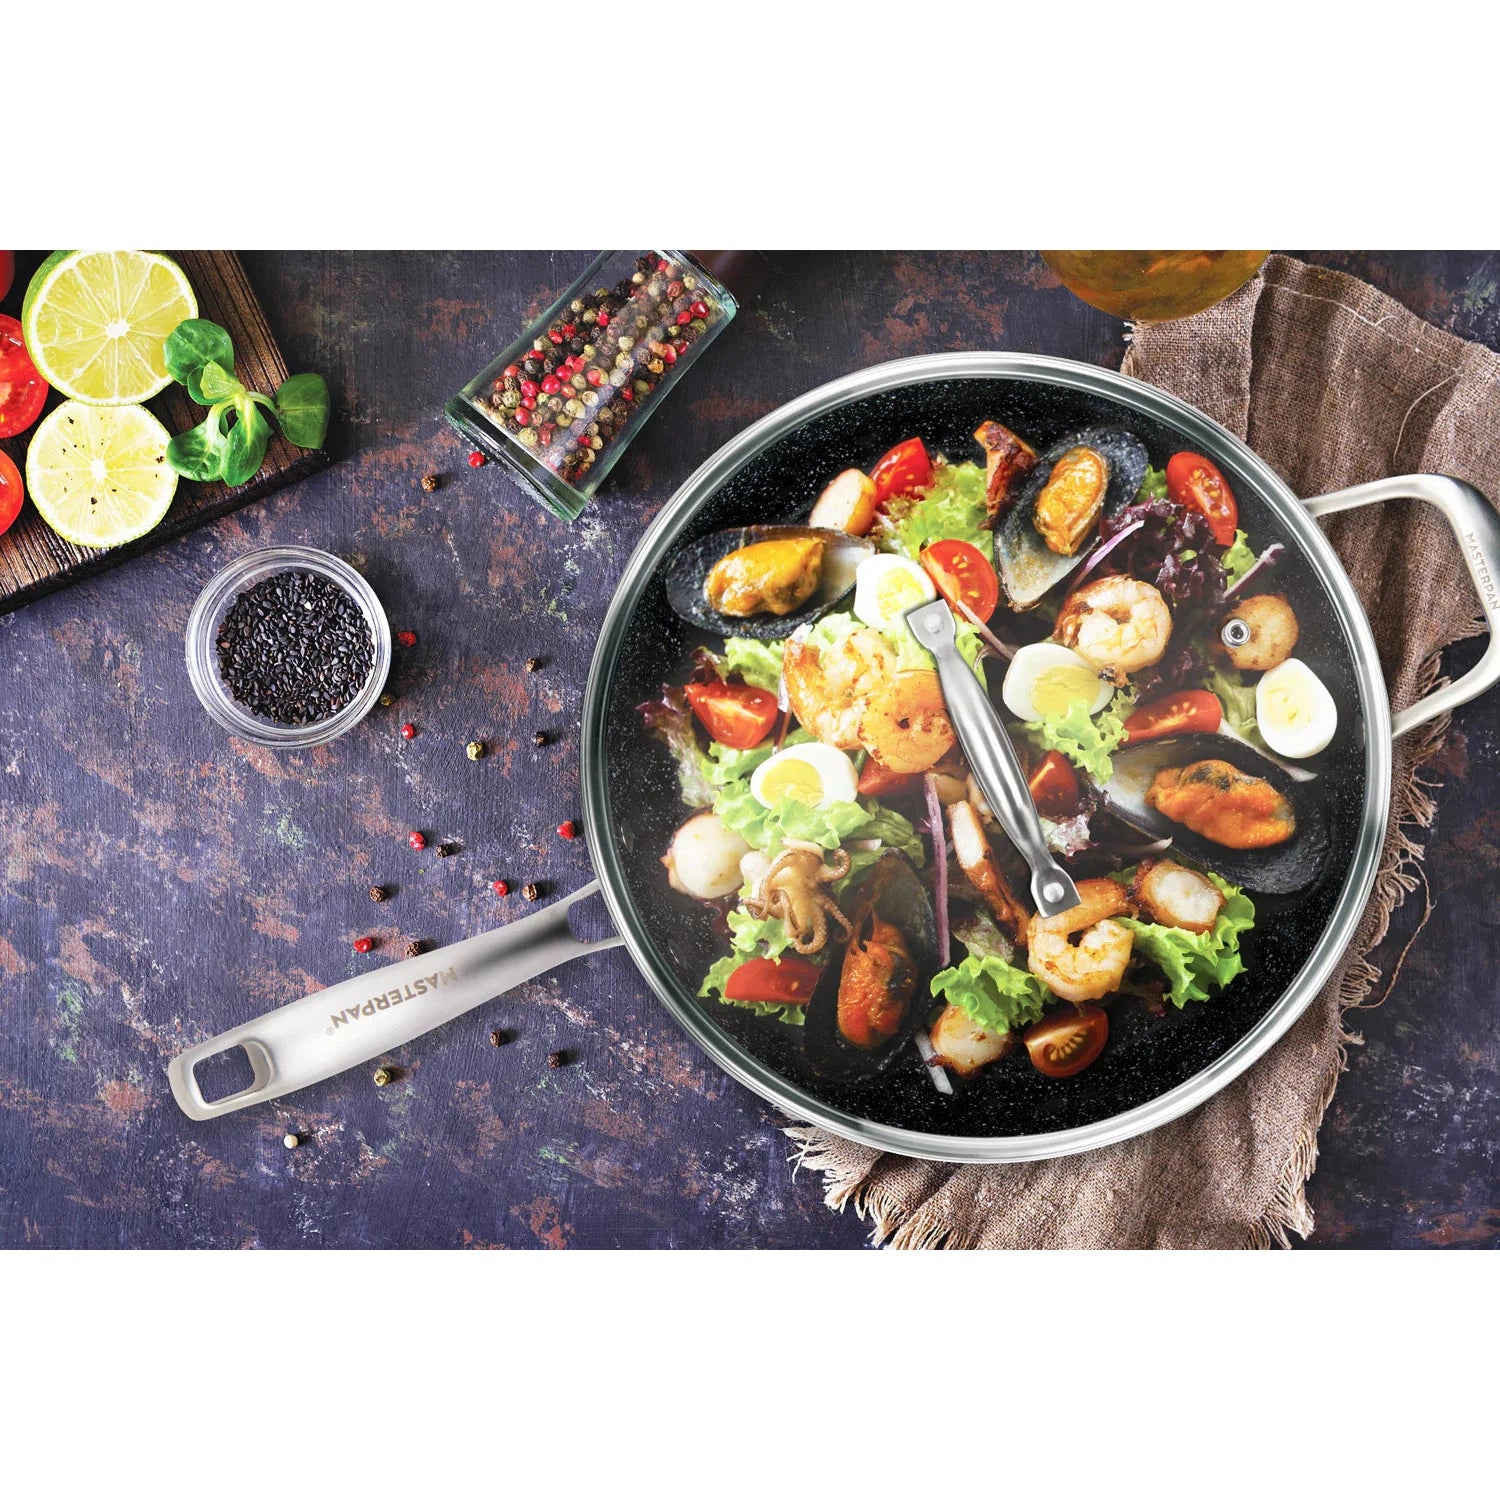  MasterPan Non-Stick 3 Section Meal Skillet, 11, Black: Home &  Kitchen